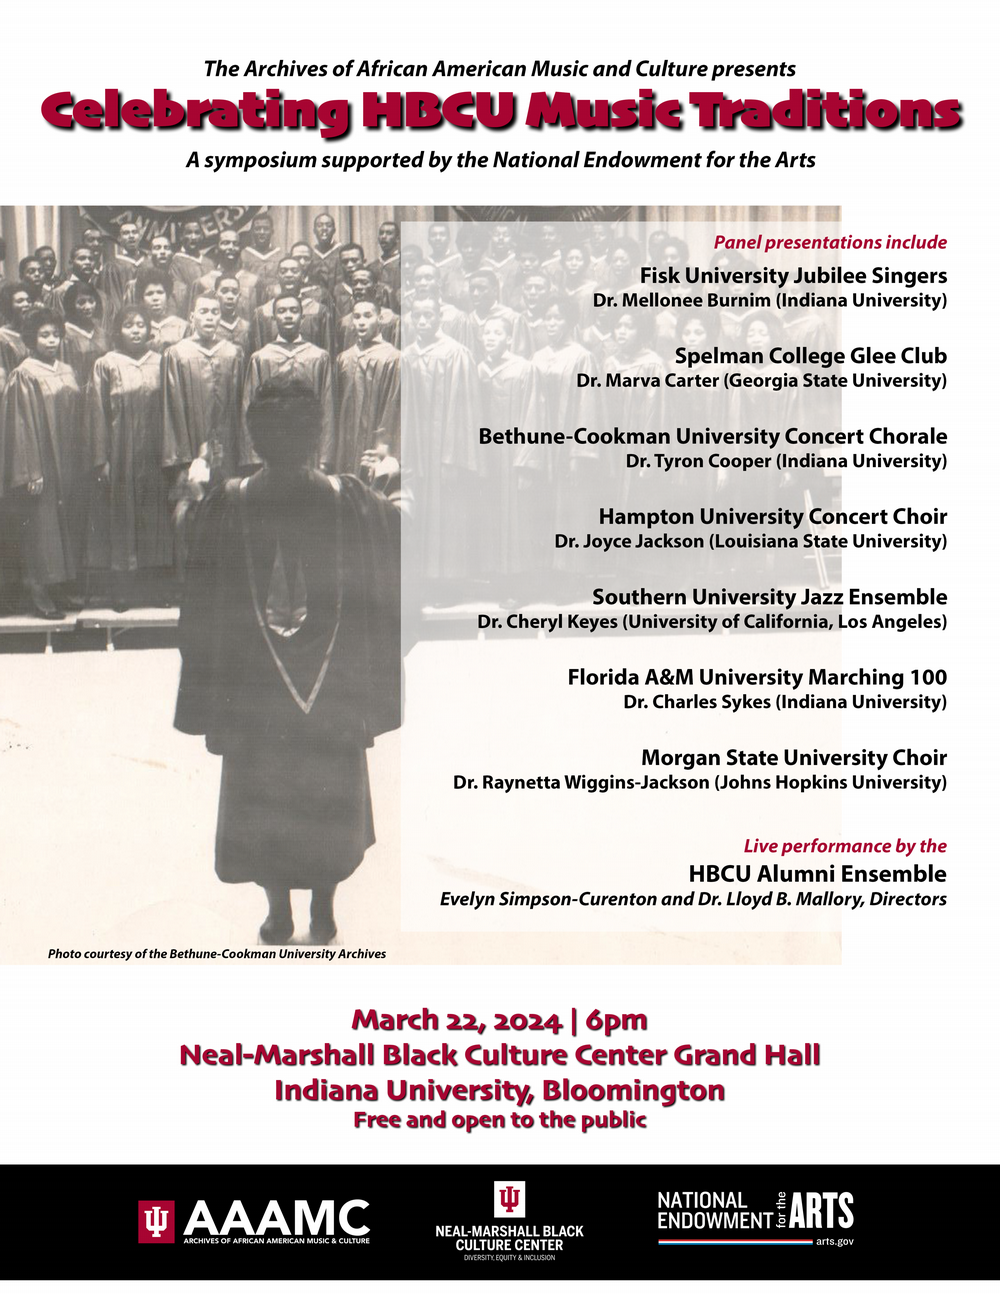 Celebrating HBCU Music Traditions event flyer